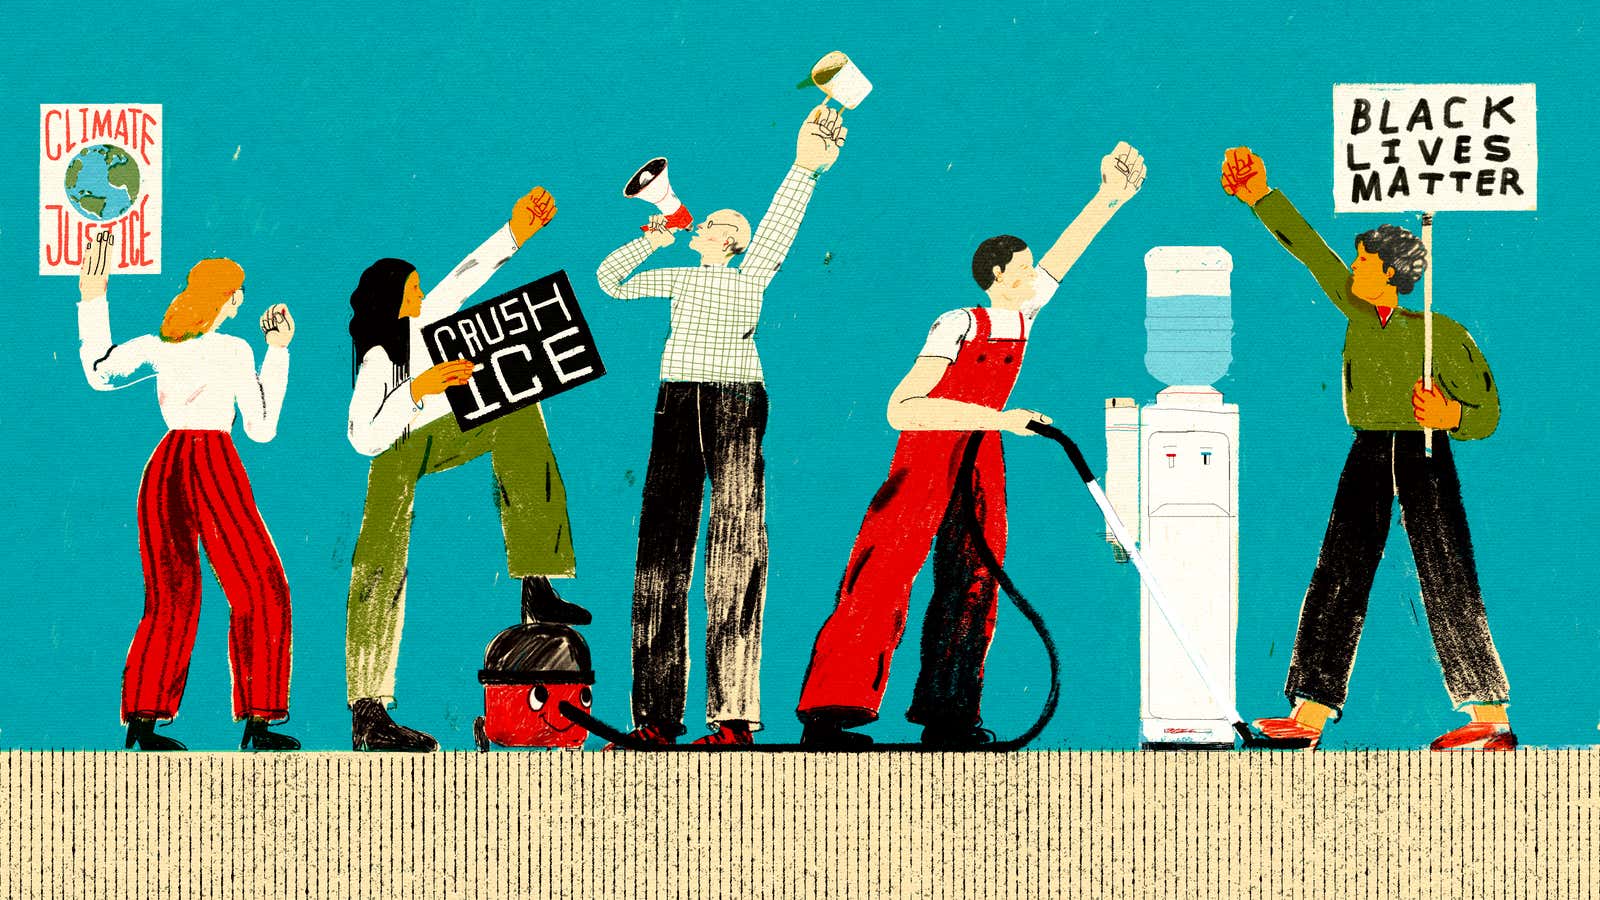 How a new generation of workers has revitalized employee activism